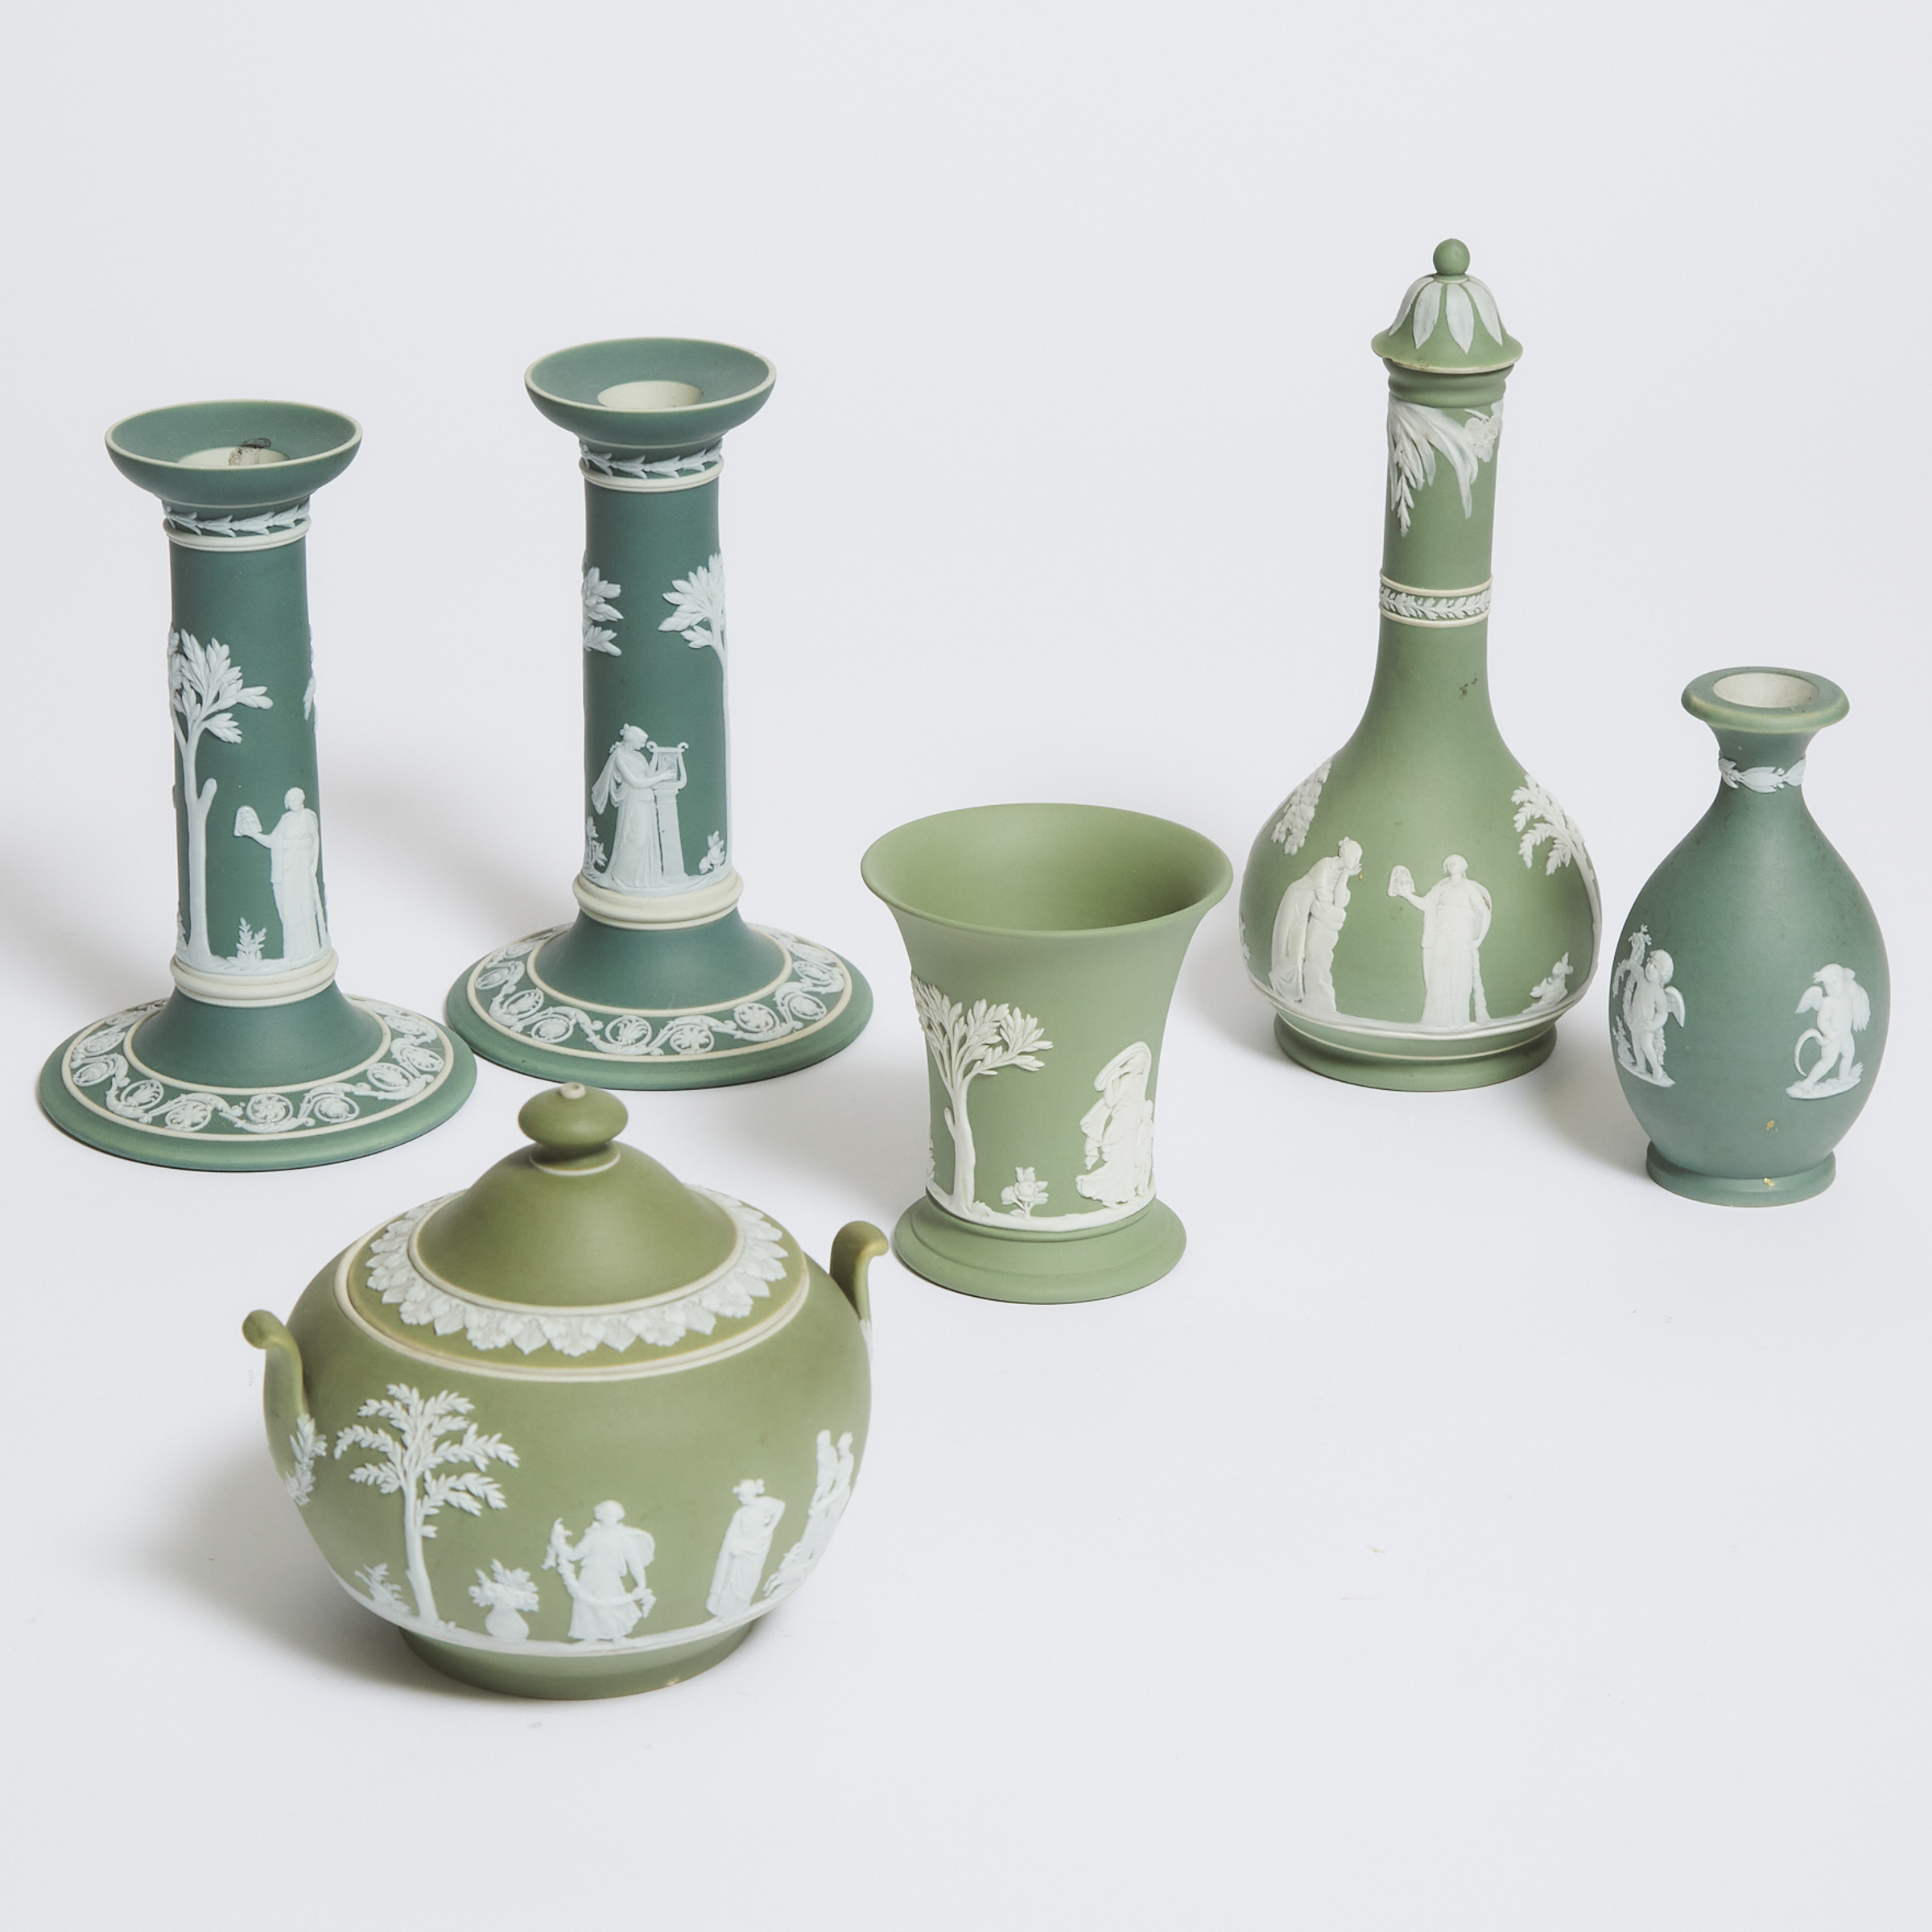 Group of Wedgwood Green Jasper and Jasper-Dip Pottery, late 19th/20th century